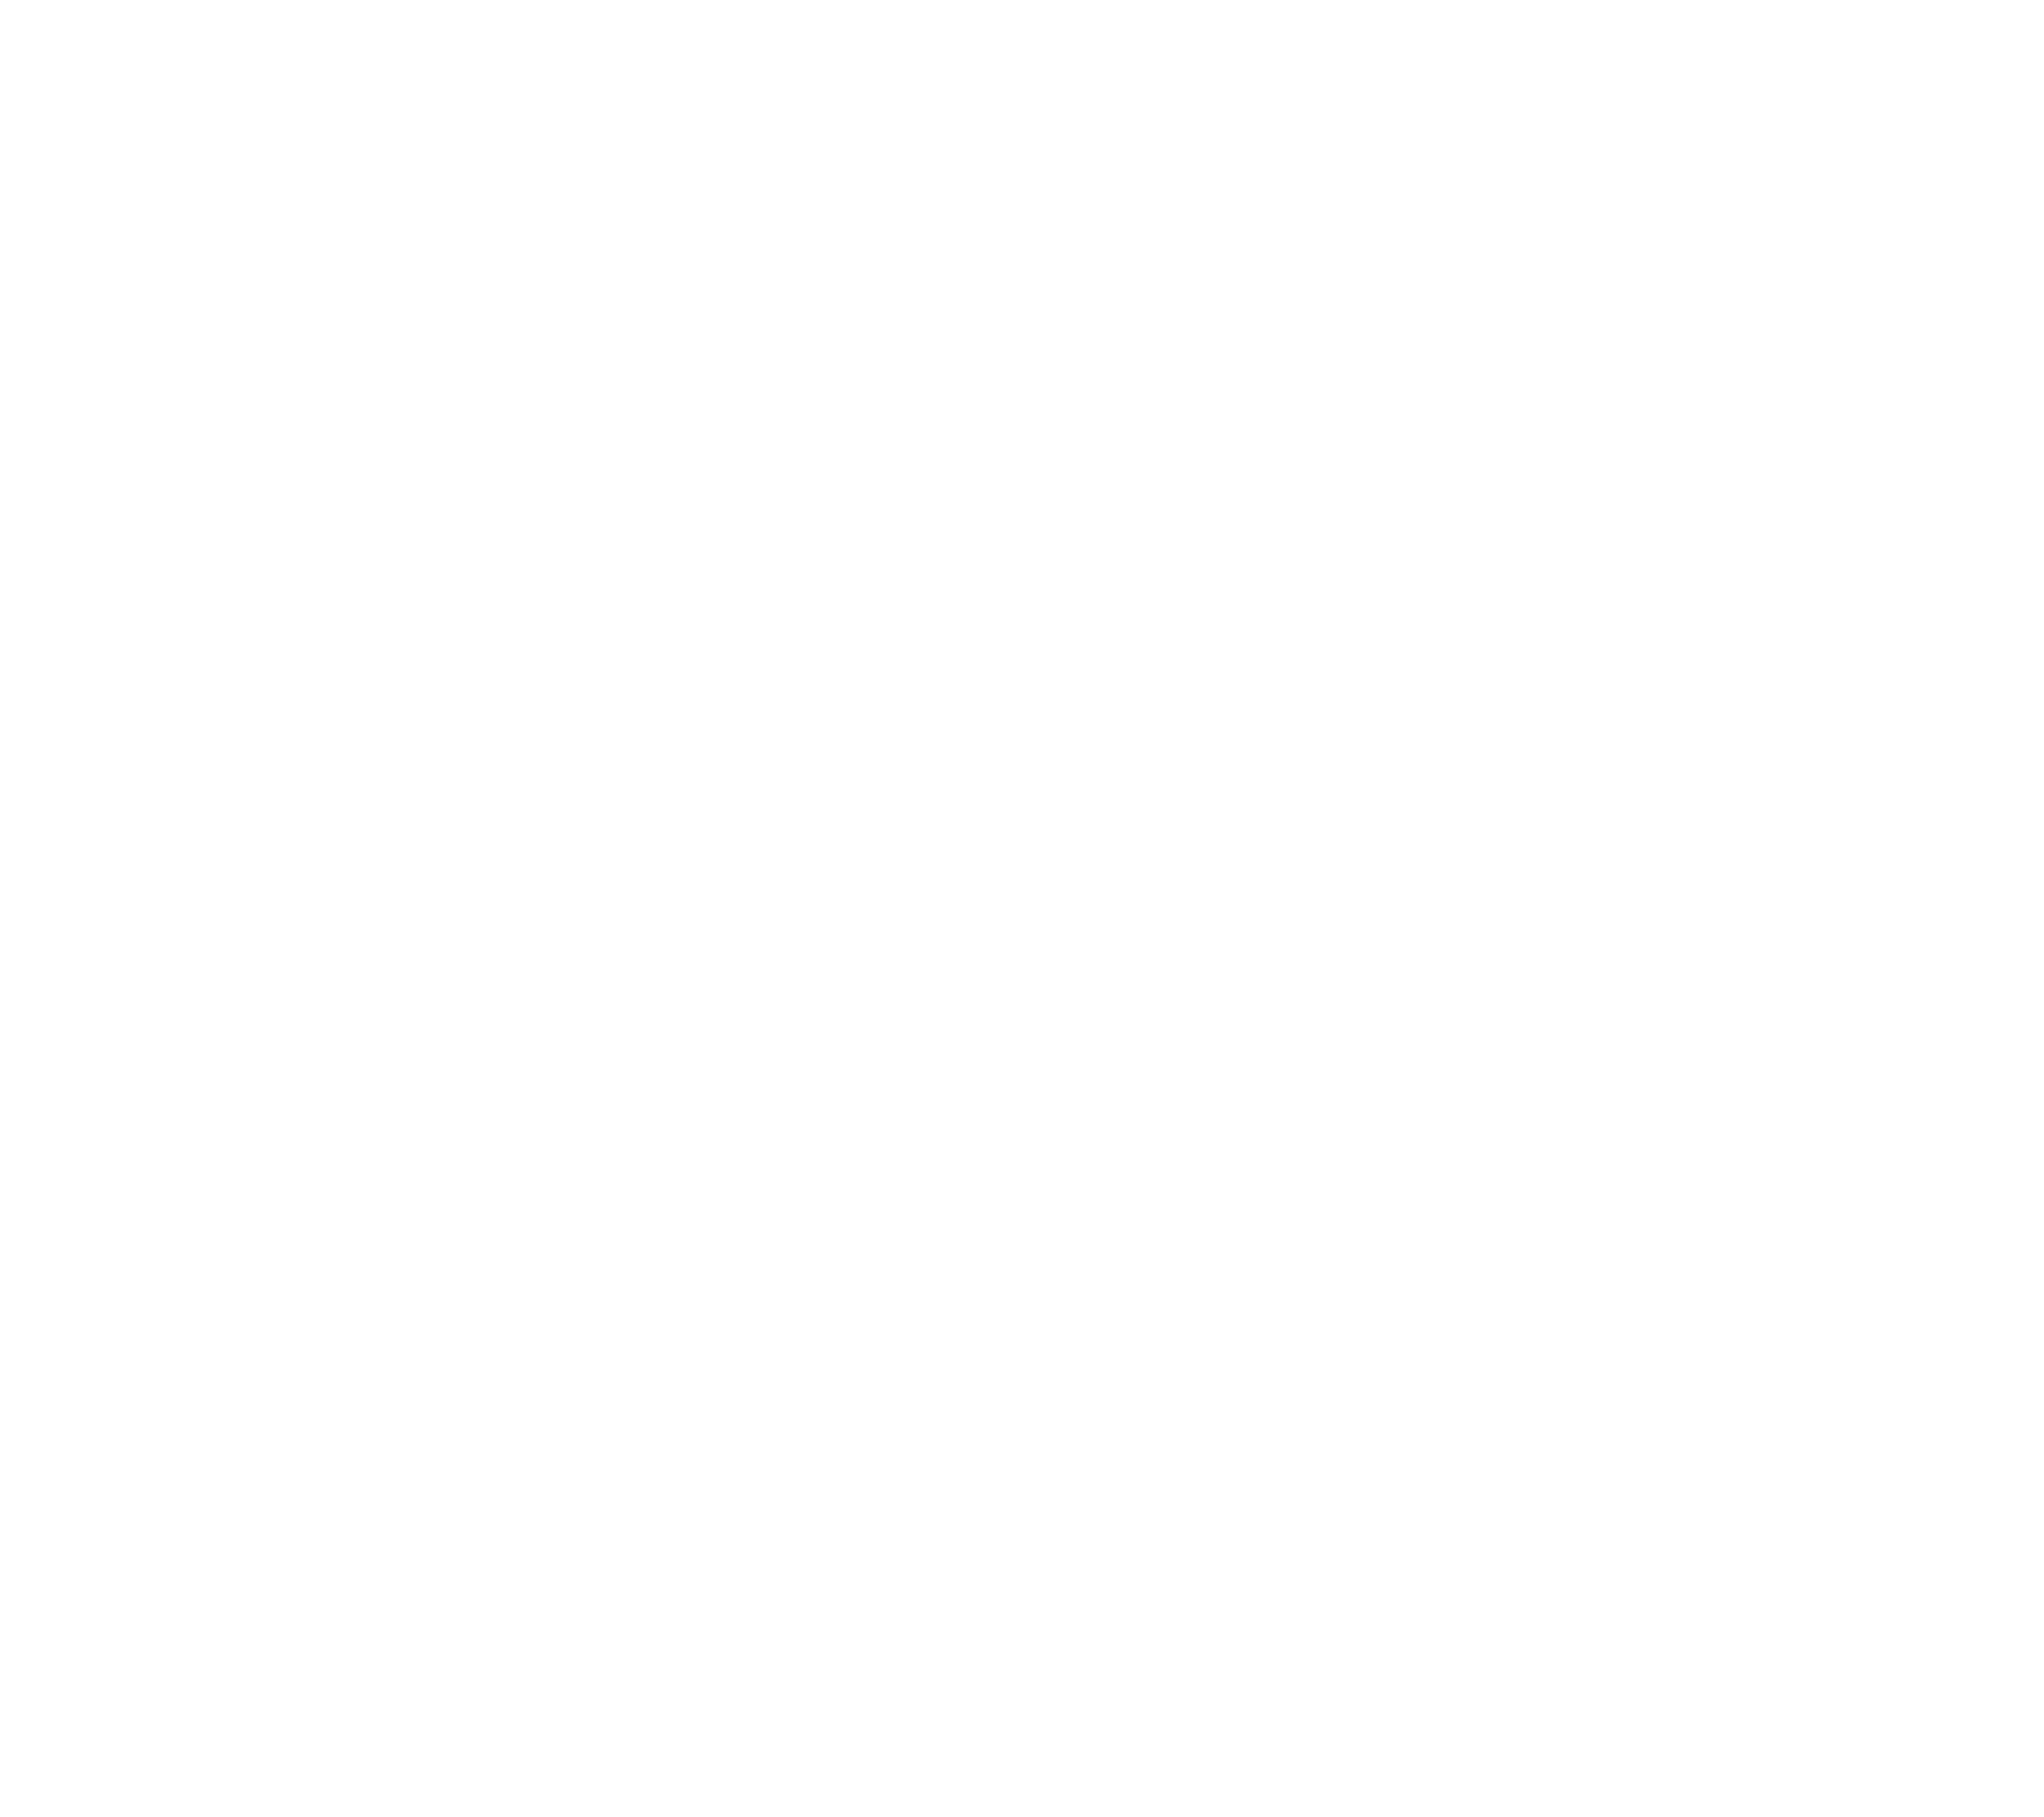 Merry Christmas Deco Text Png Clip Art Image Gallery Yopriceville High Quality Images And Transparent Png Free Clipart